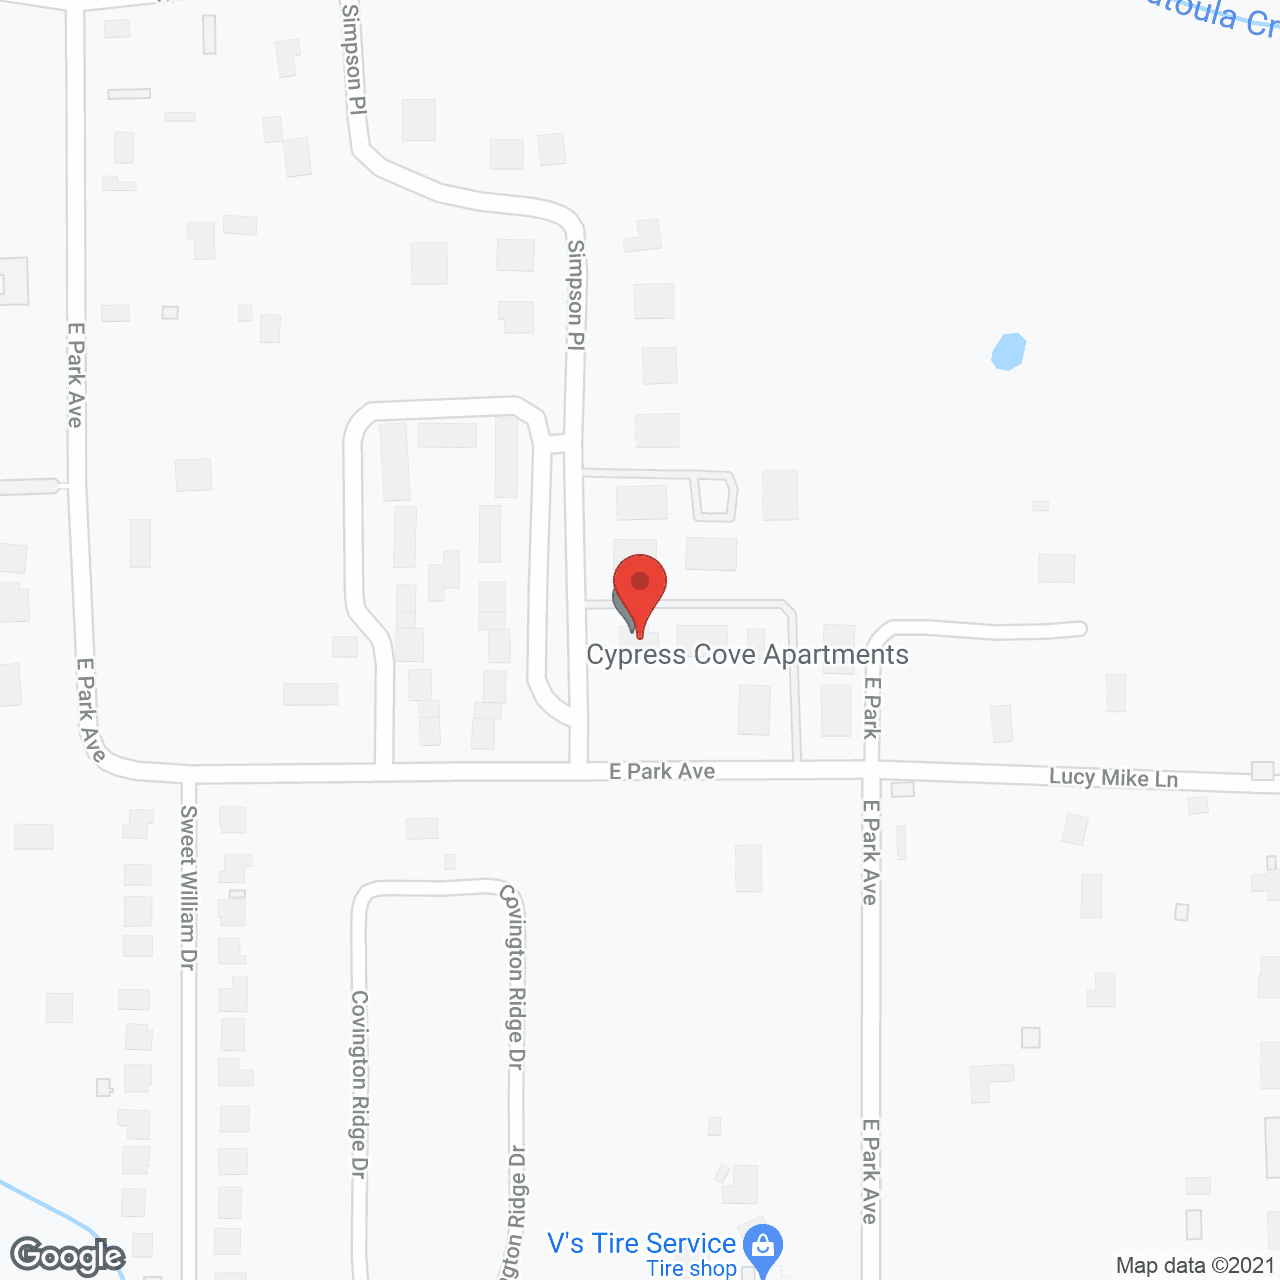 Cypress Cove Apartments in google map